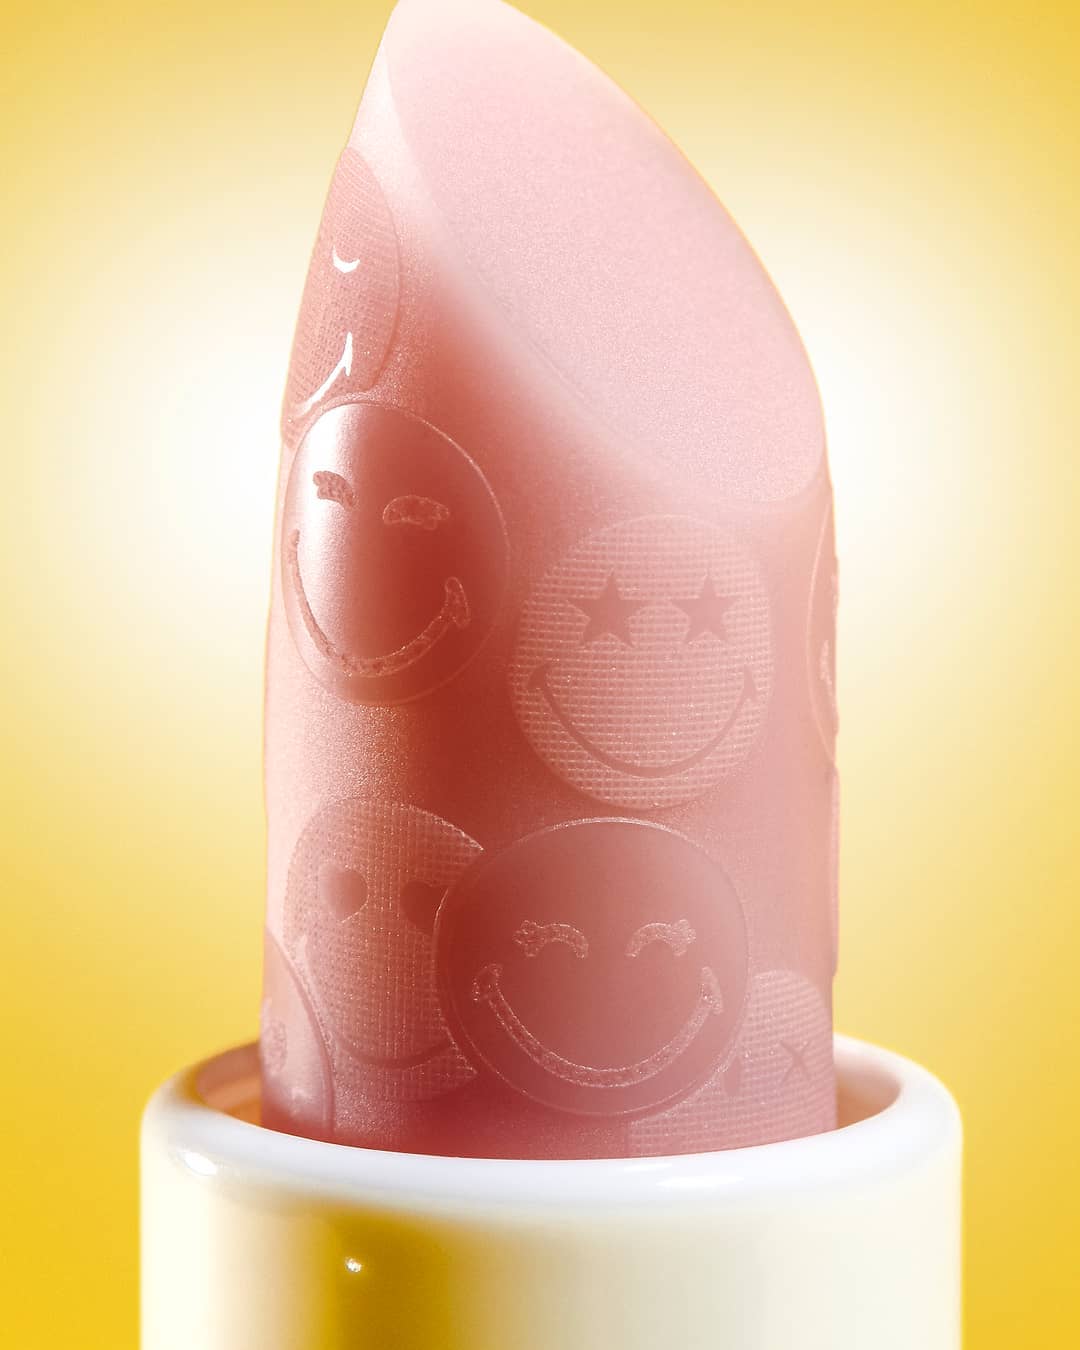 Ciaté London - Keep you lips hydrated during the heatwave with our Ciaté London x Smiley World #SmoothOn Lip Balm 💦 👄 enhanced with mood boosting poppy and energising cacao extract, the gel-like bal...